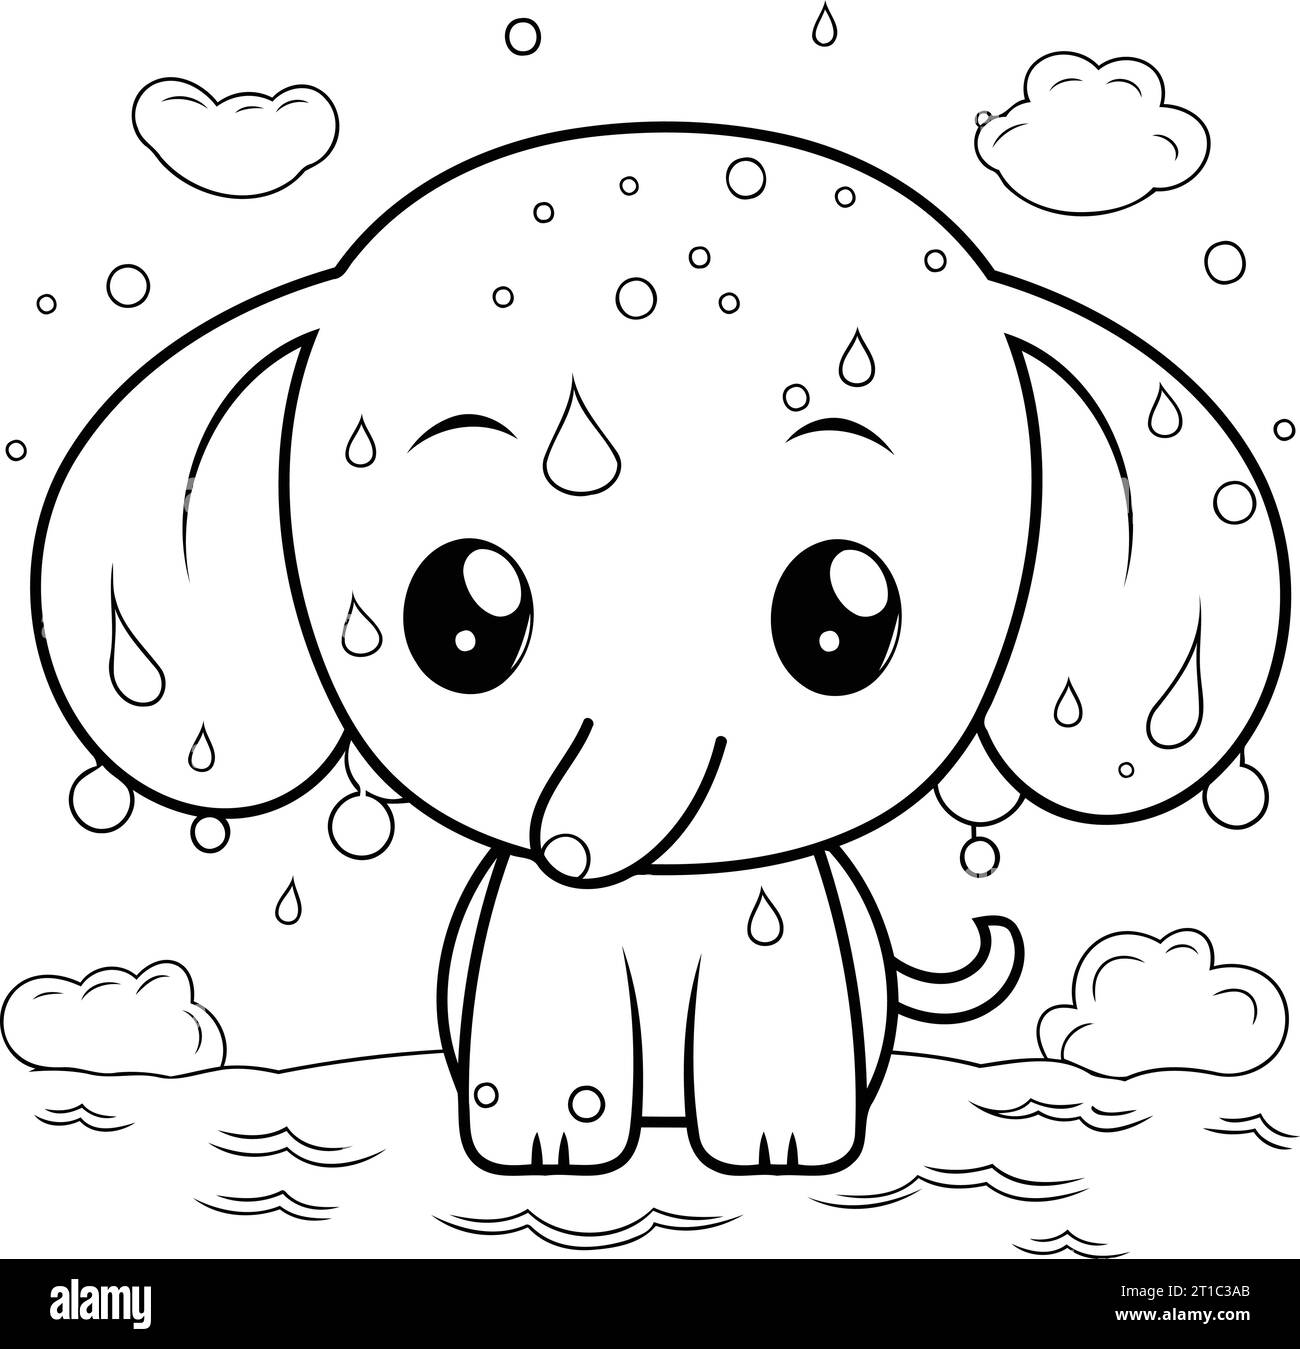 Coloring Page Outline Of Cartoon Elephant With Rain Drops Vector Illustration Stock Vector